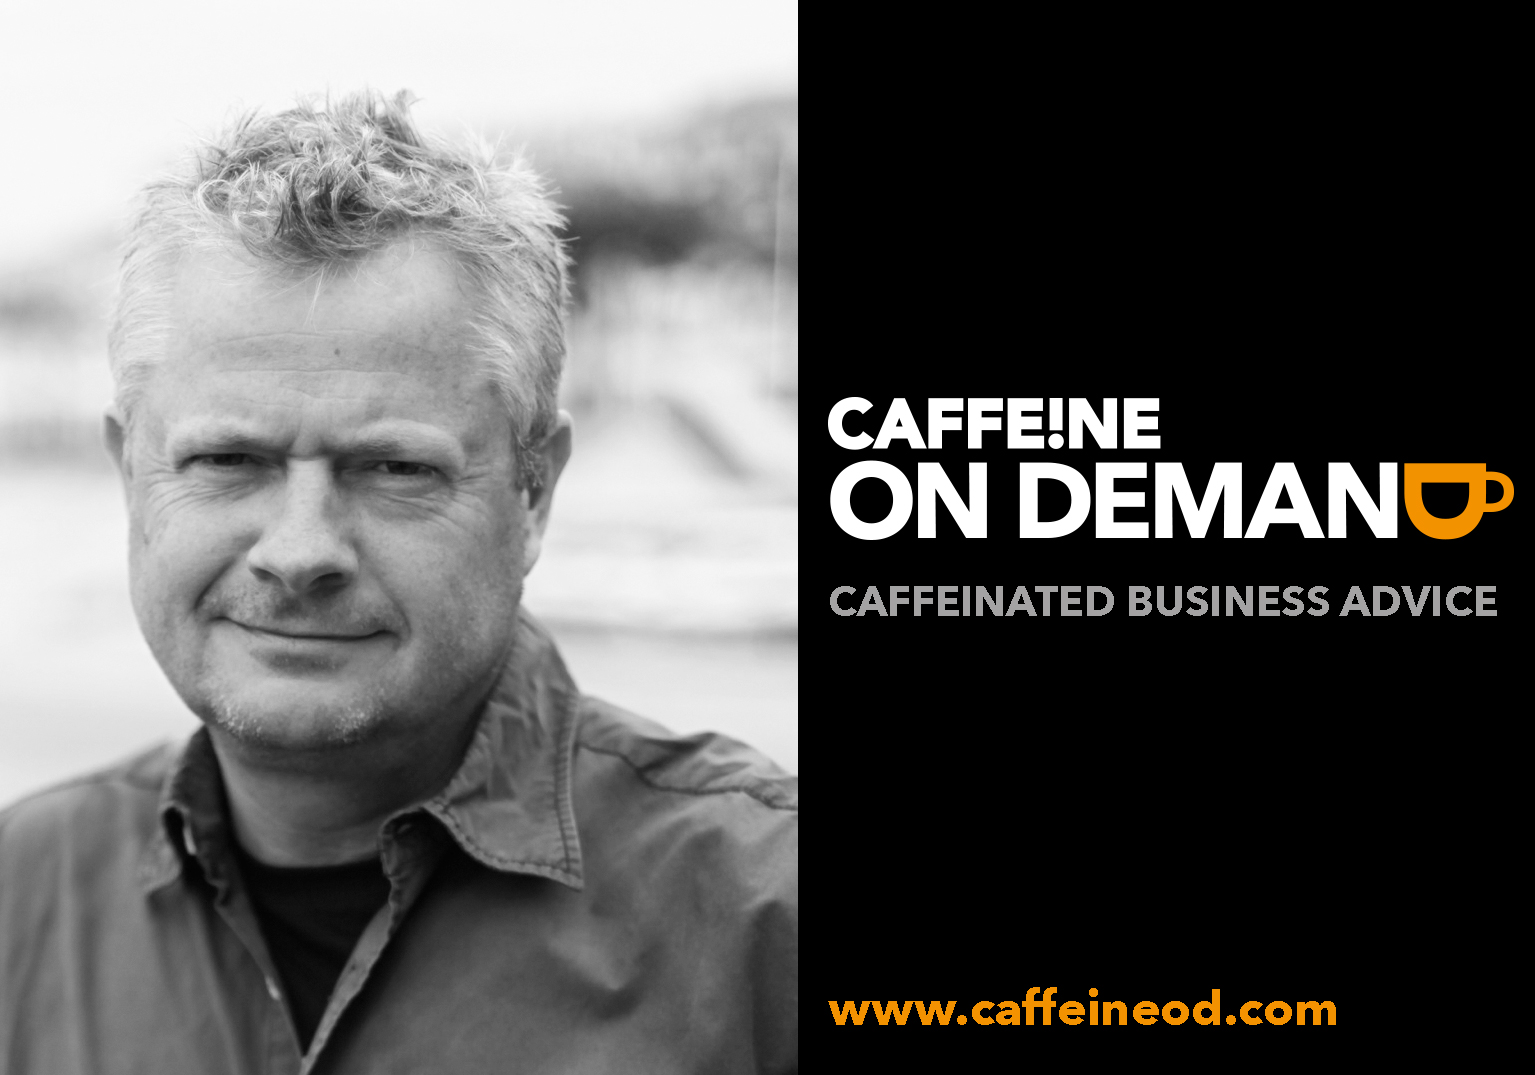 Caffeine on Demand launches today